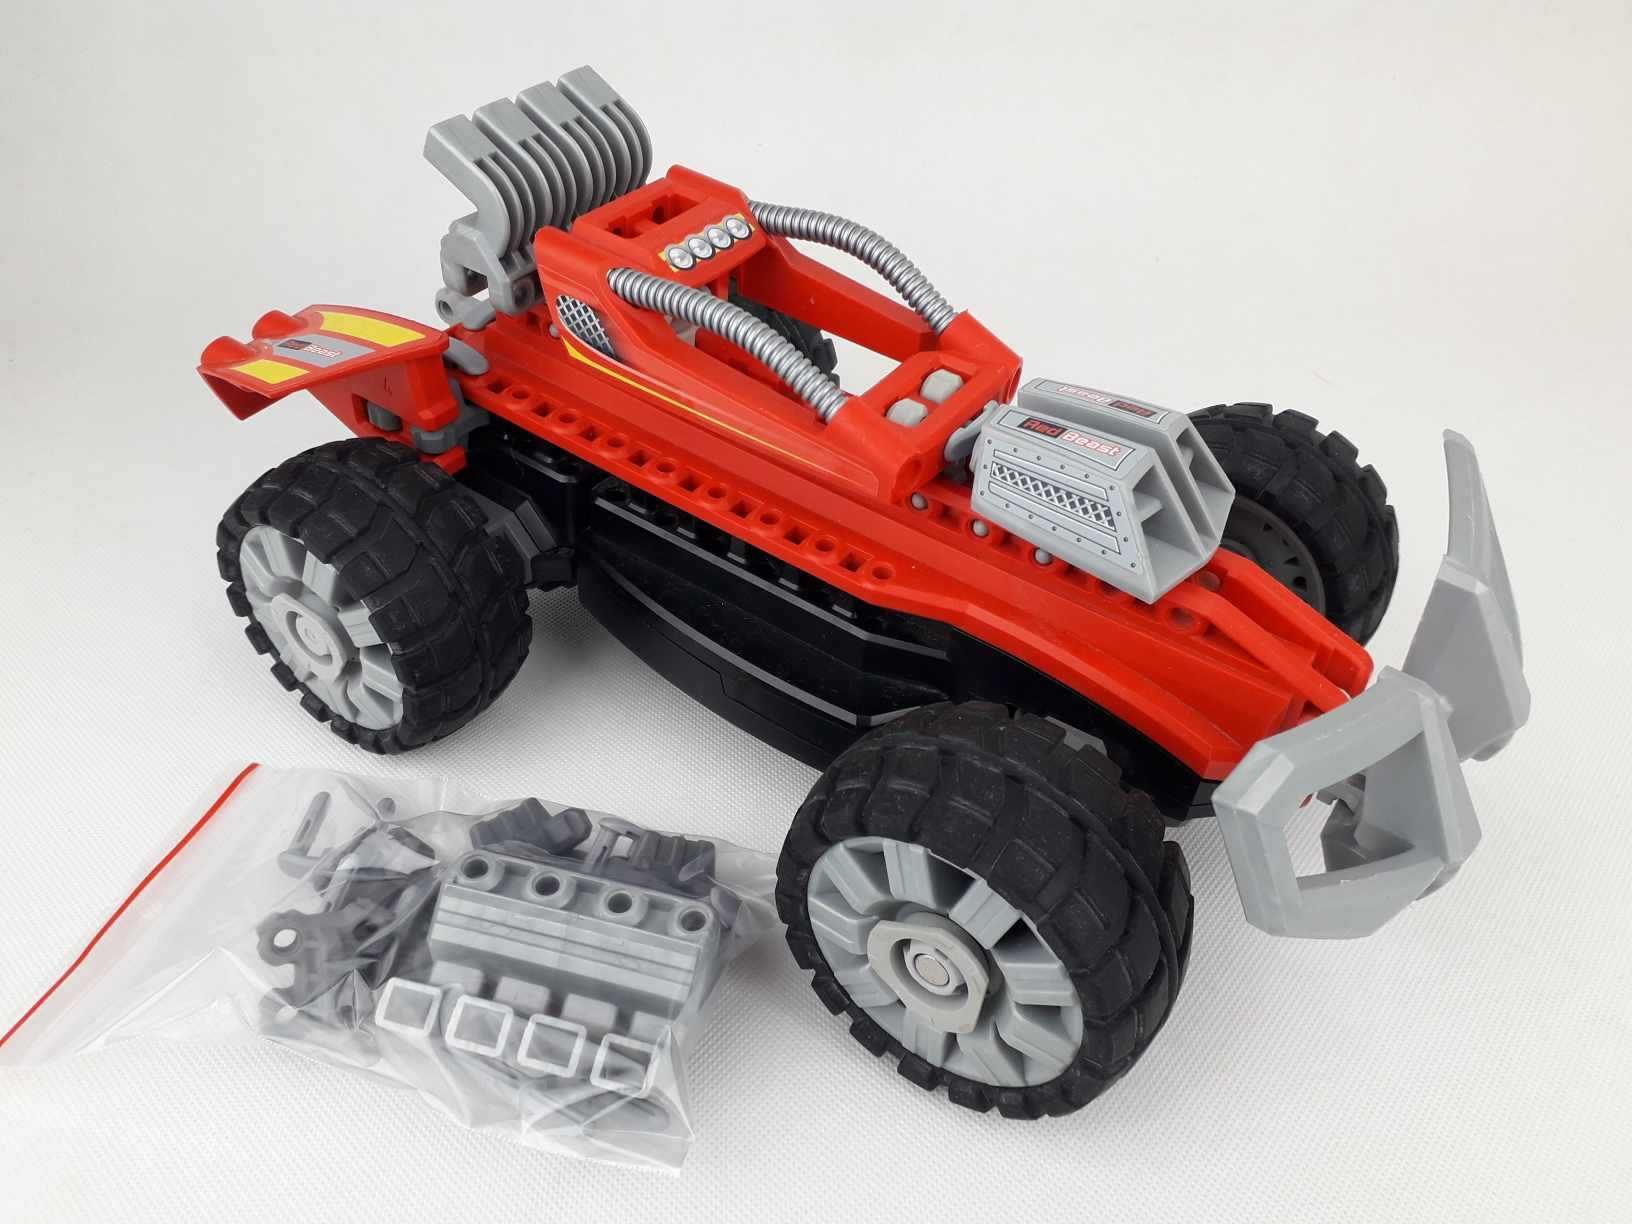 LEGO Technic Racers 8378 Red Beast RC